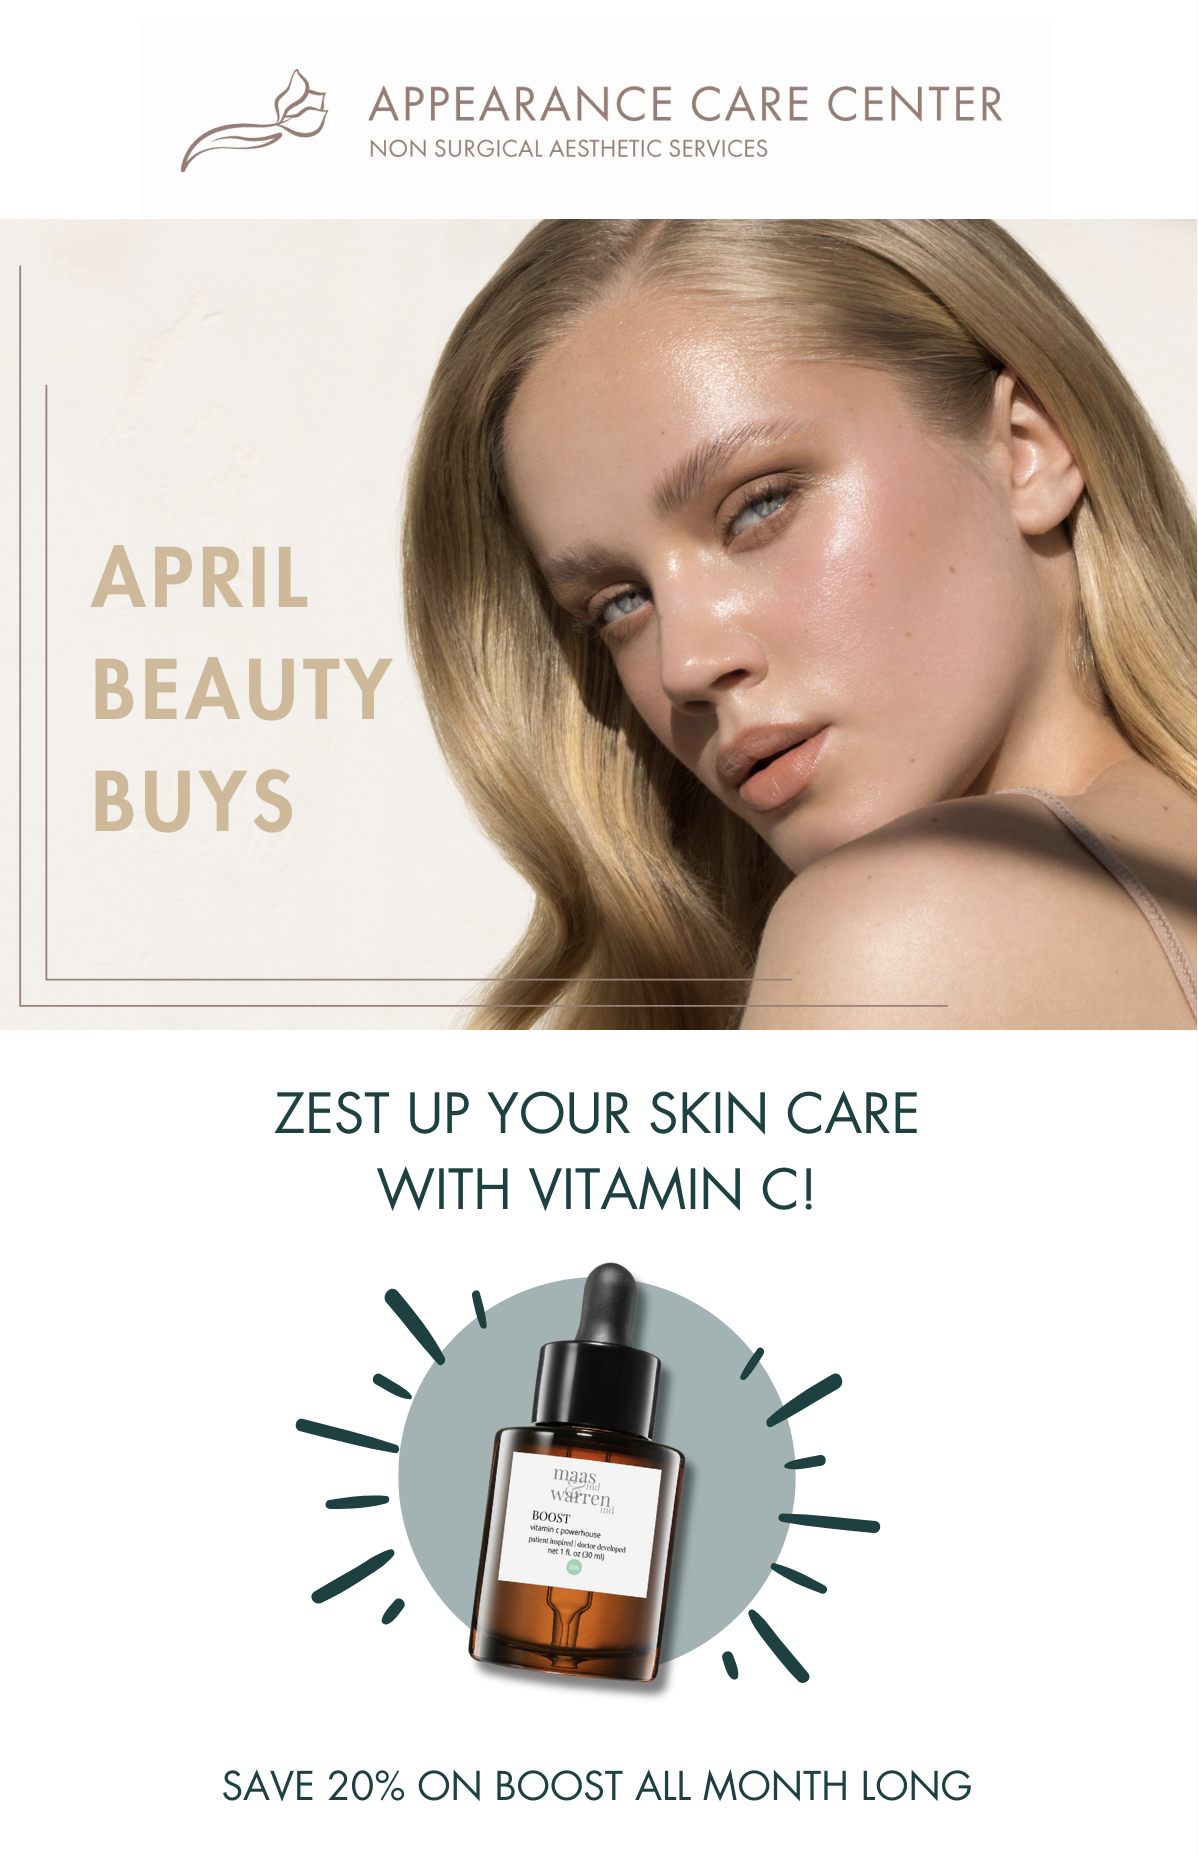 close up on womans face april beauty buys promo